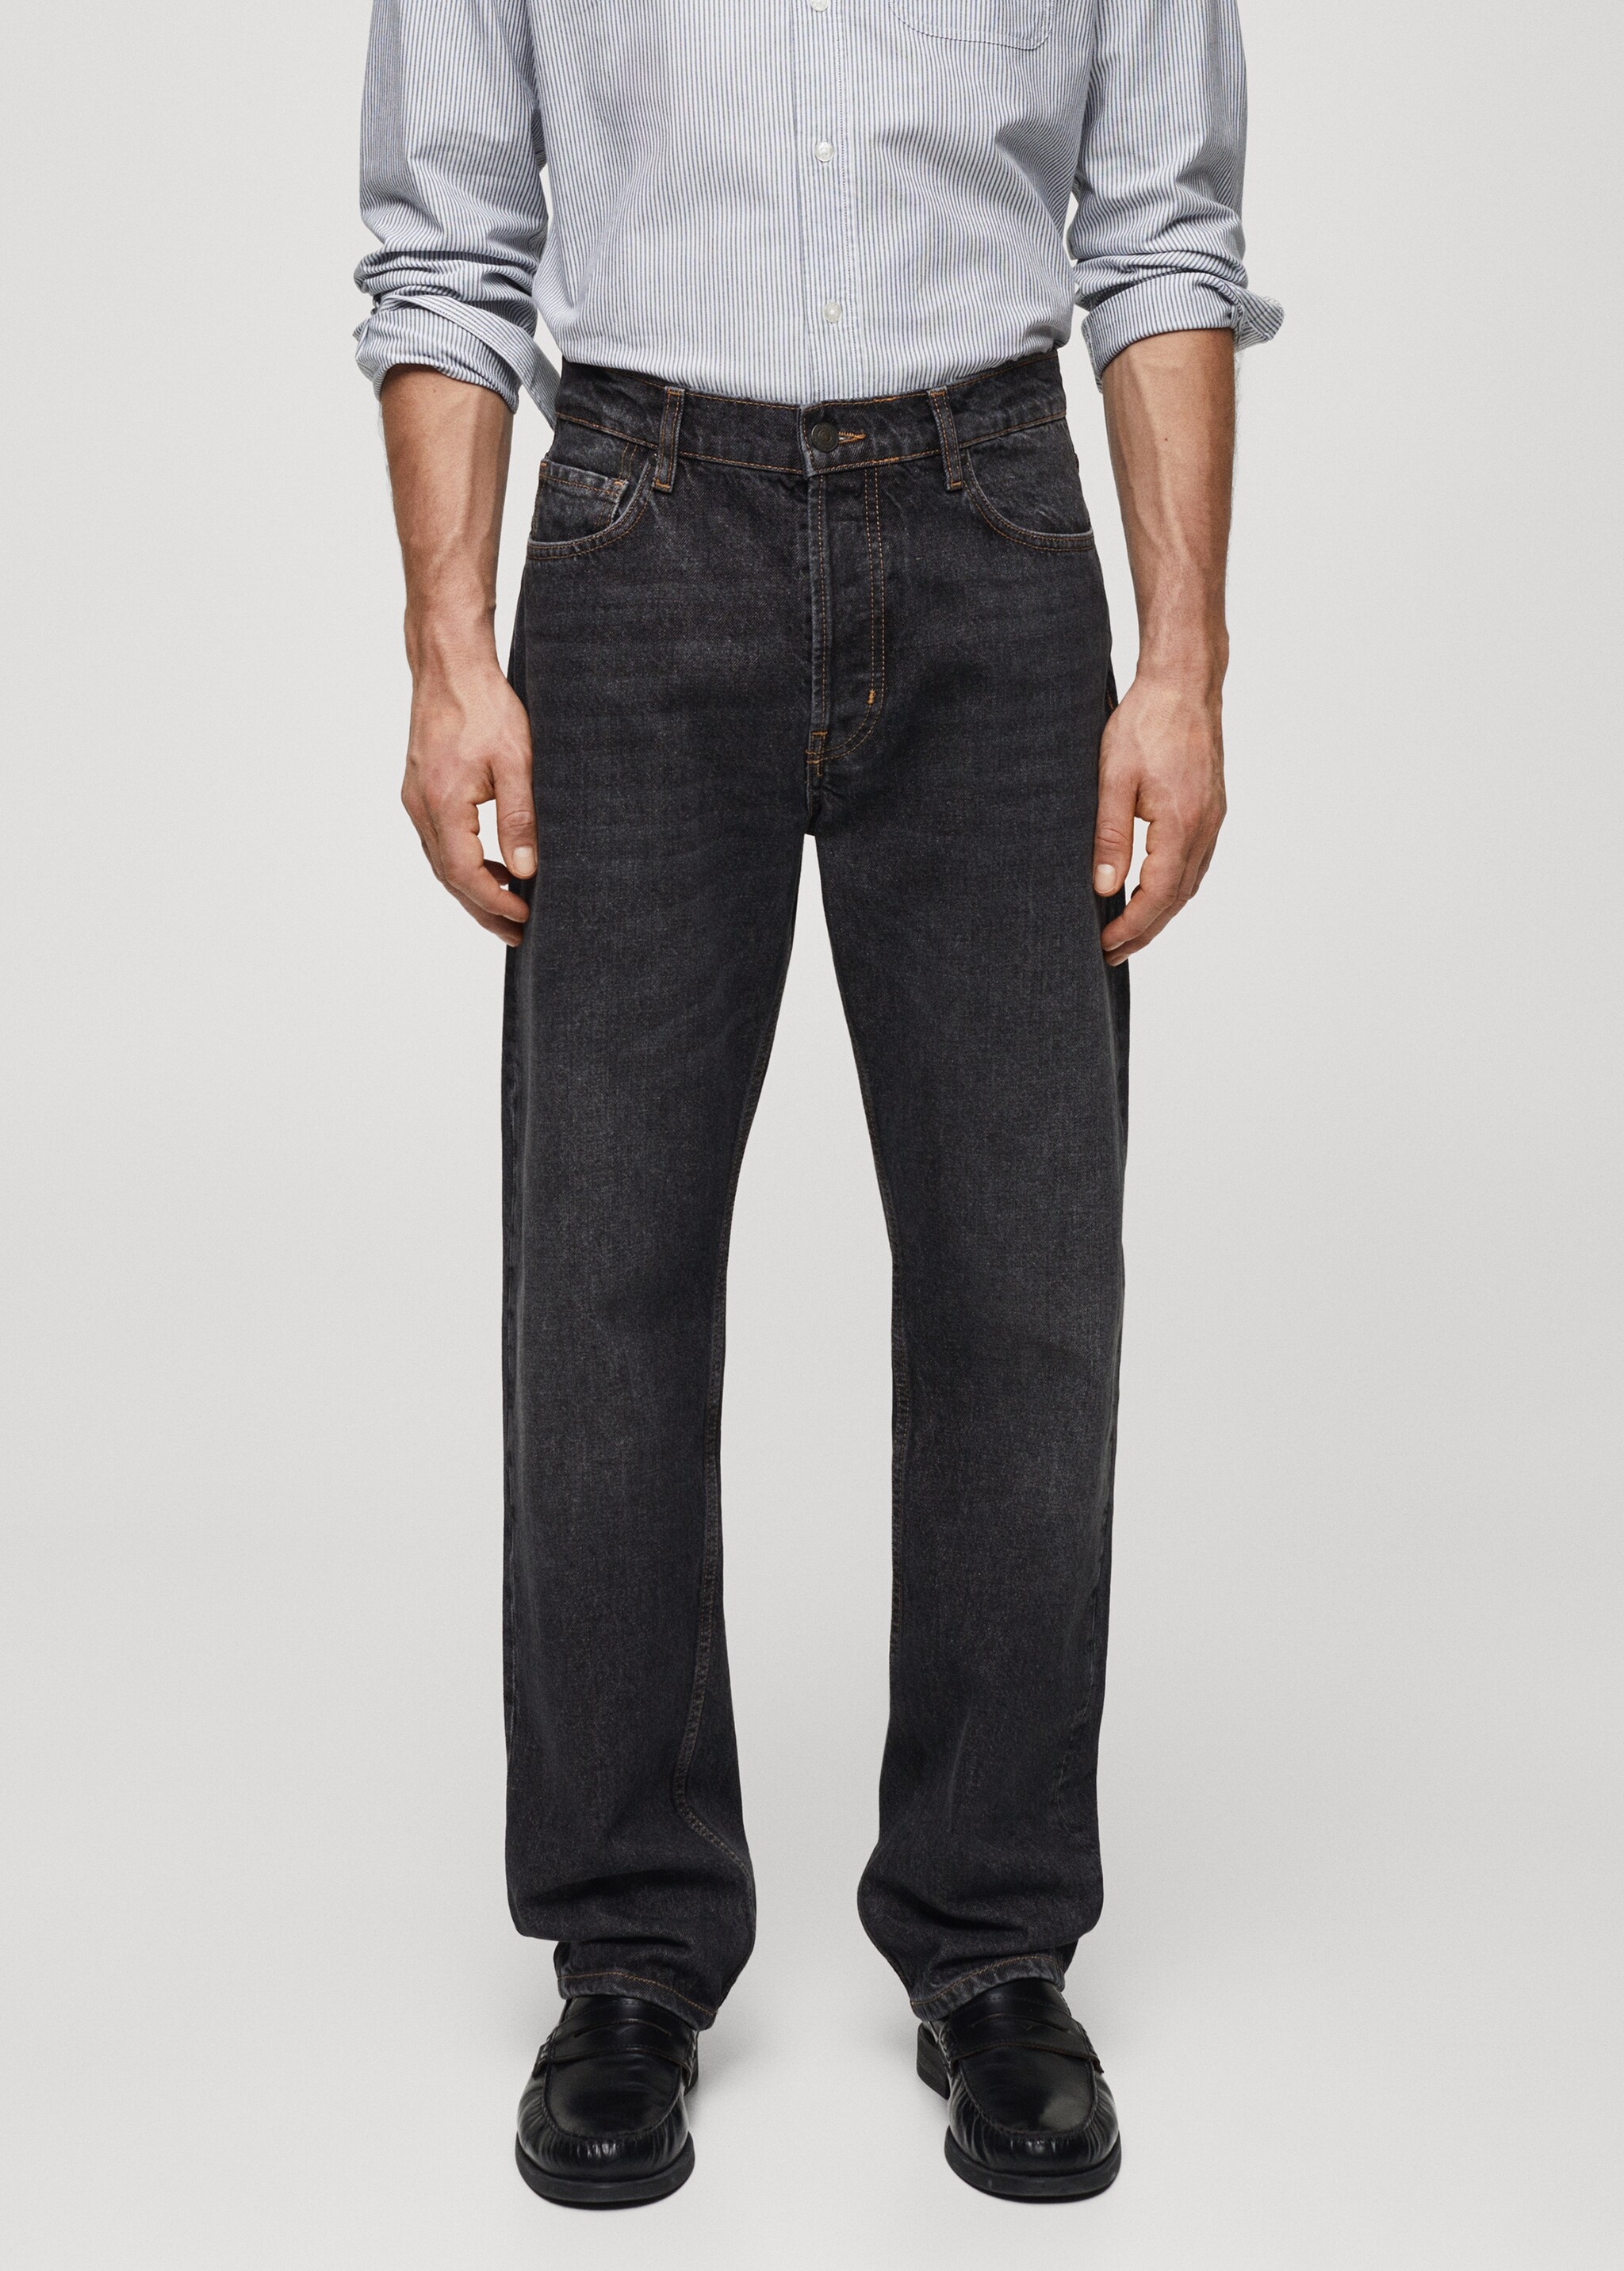 Jeans relaxed fit lavado oscuro - Plano medio